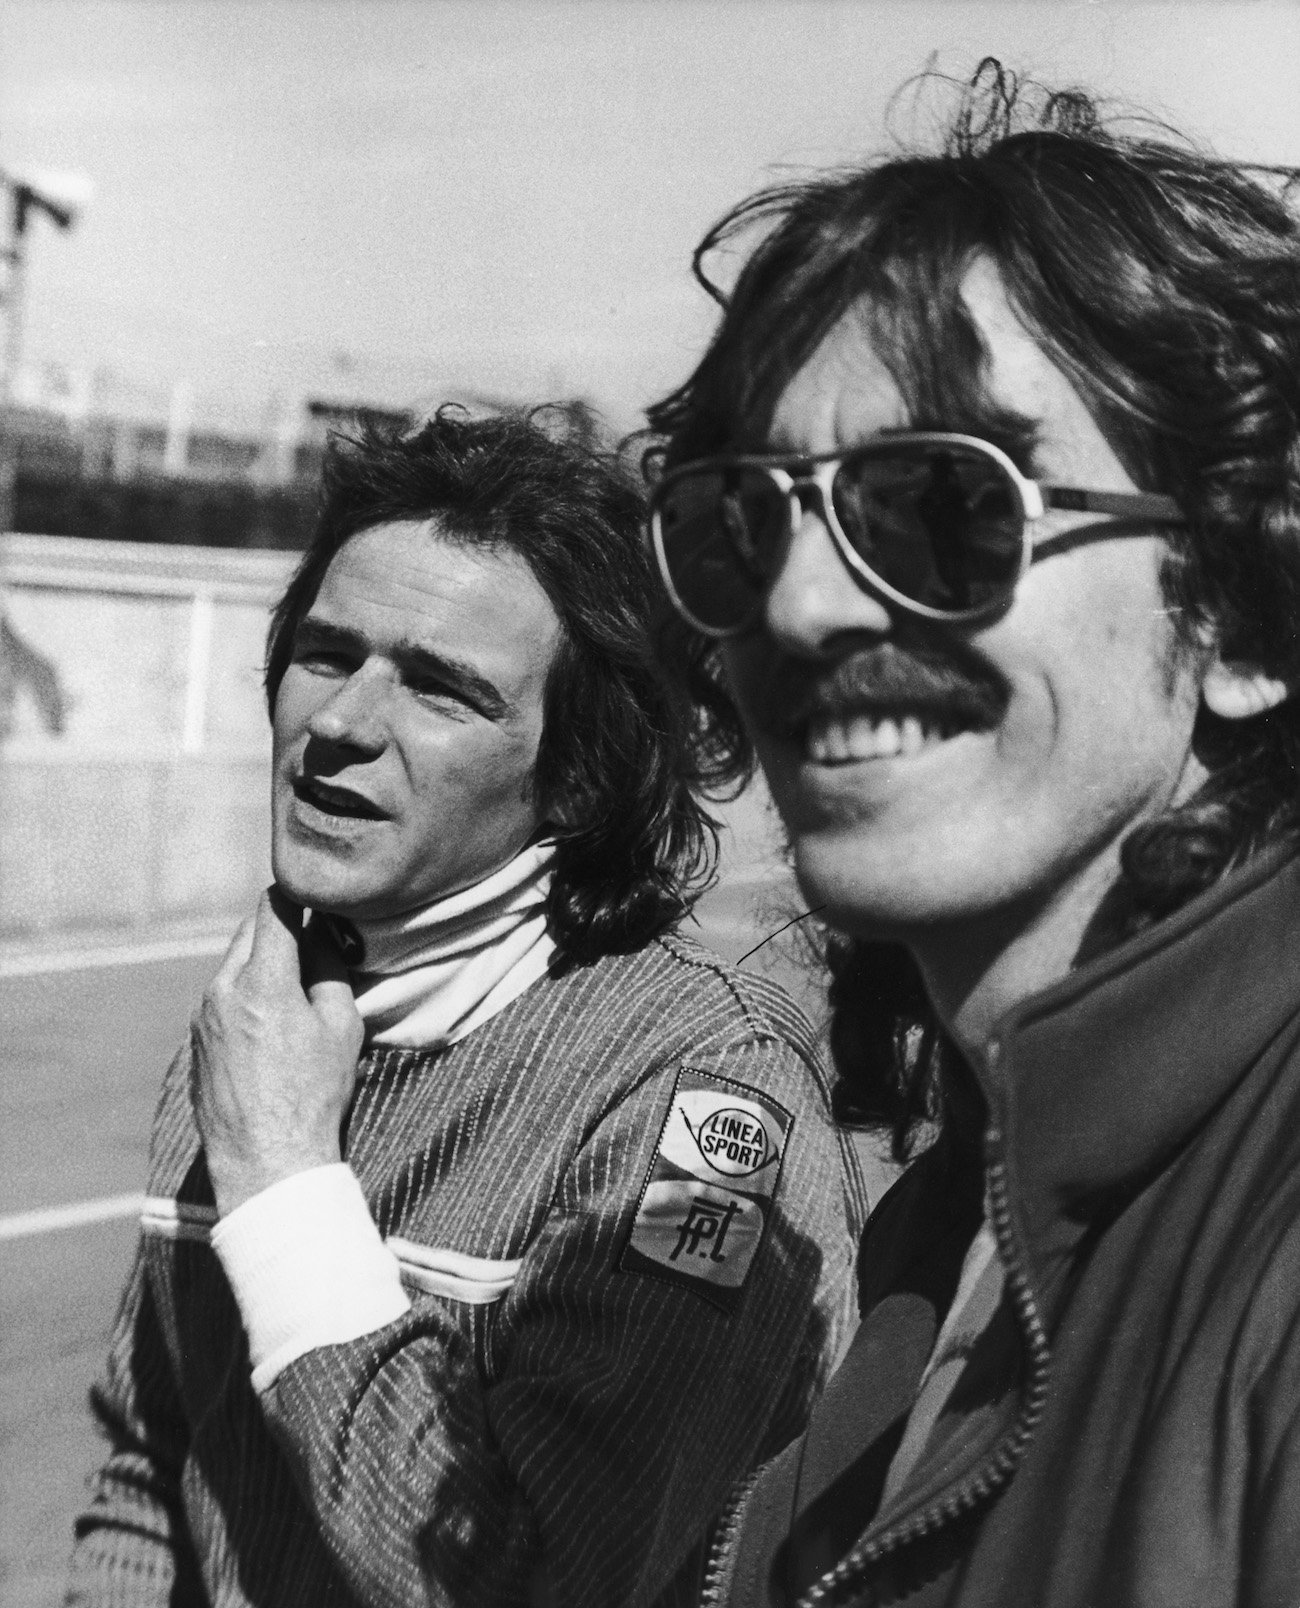 George Harrison wearing sunglasses with Formula One drive, Barry Sheene, at Brands Hatch in 1978.